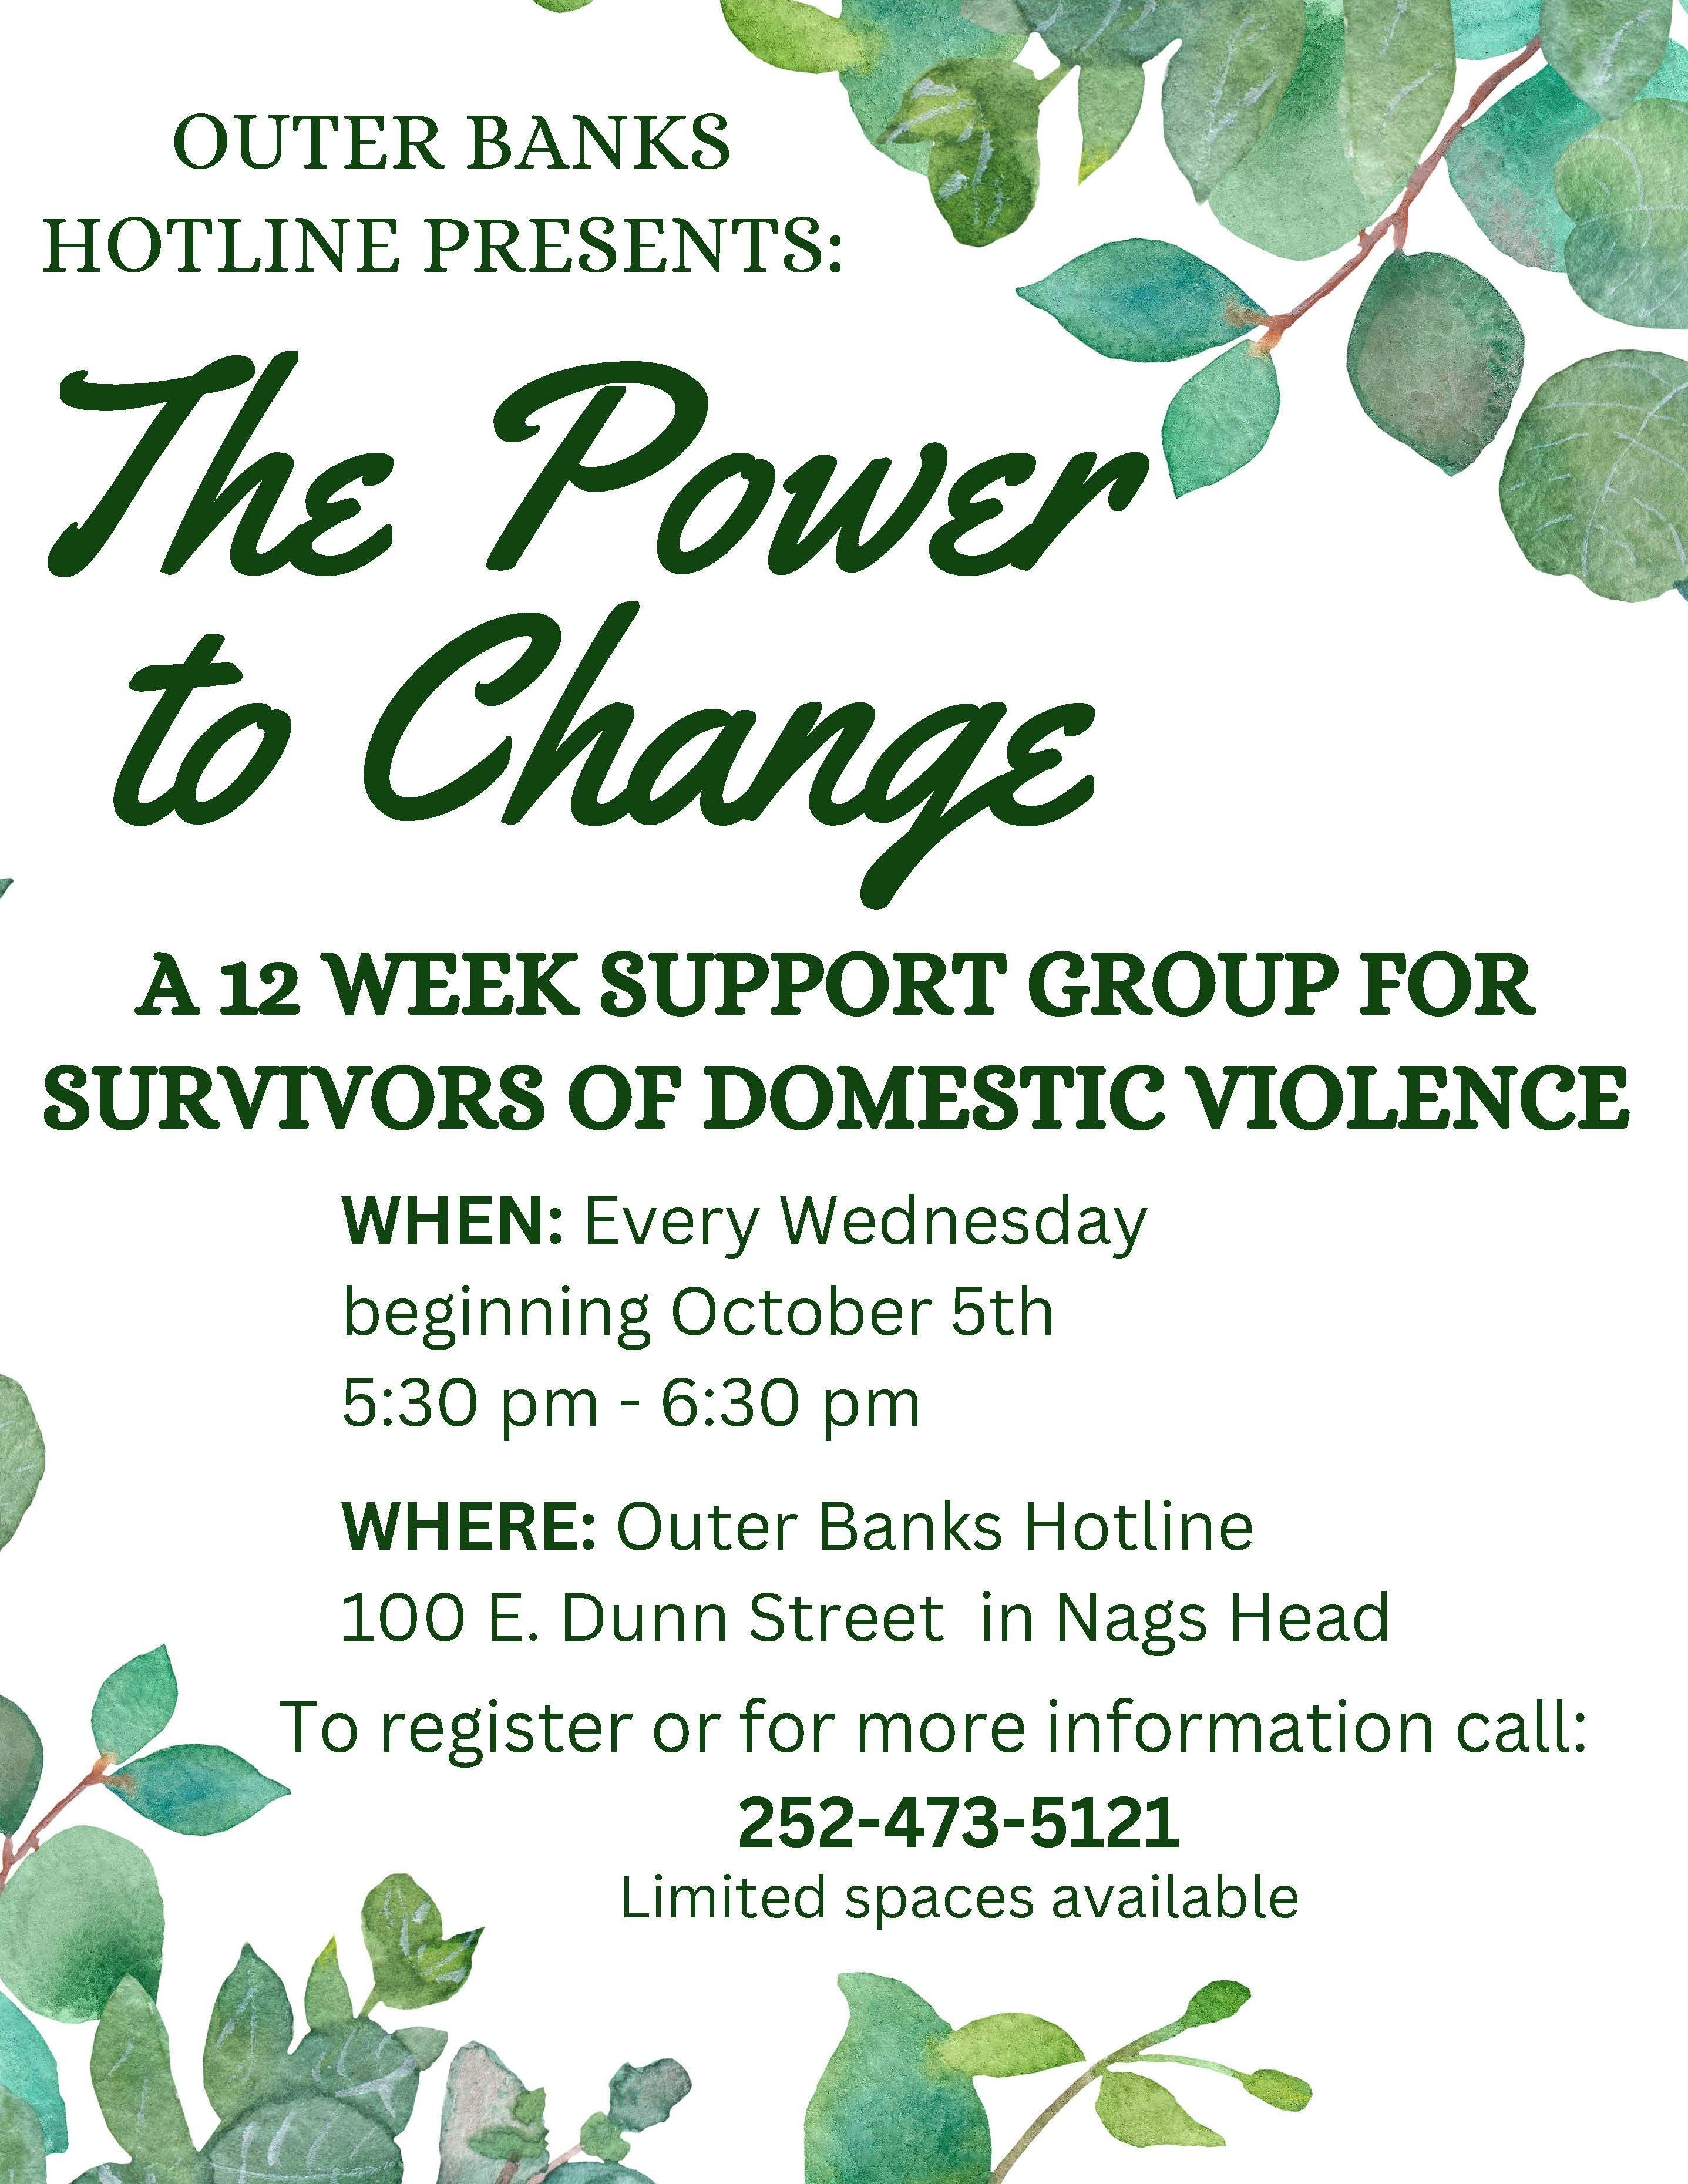 A 12 week support group for survivors of domestic violence. 